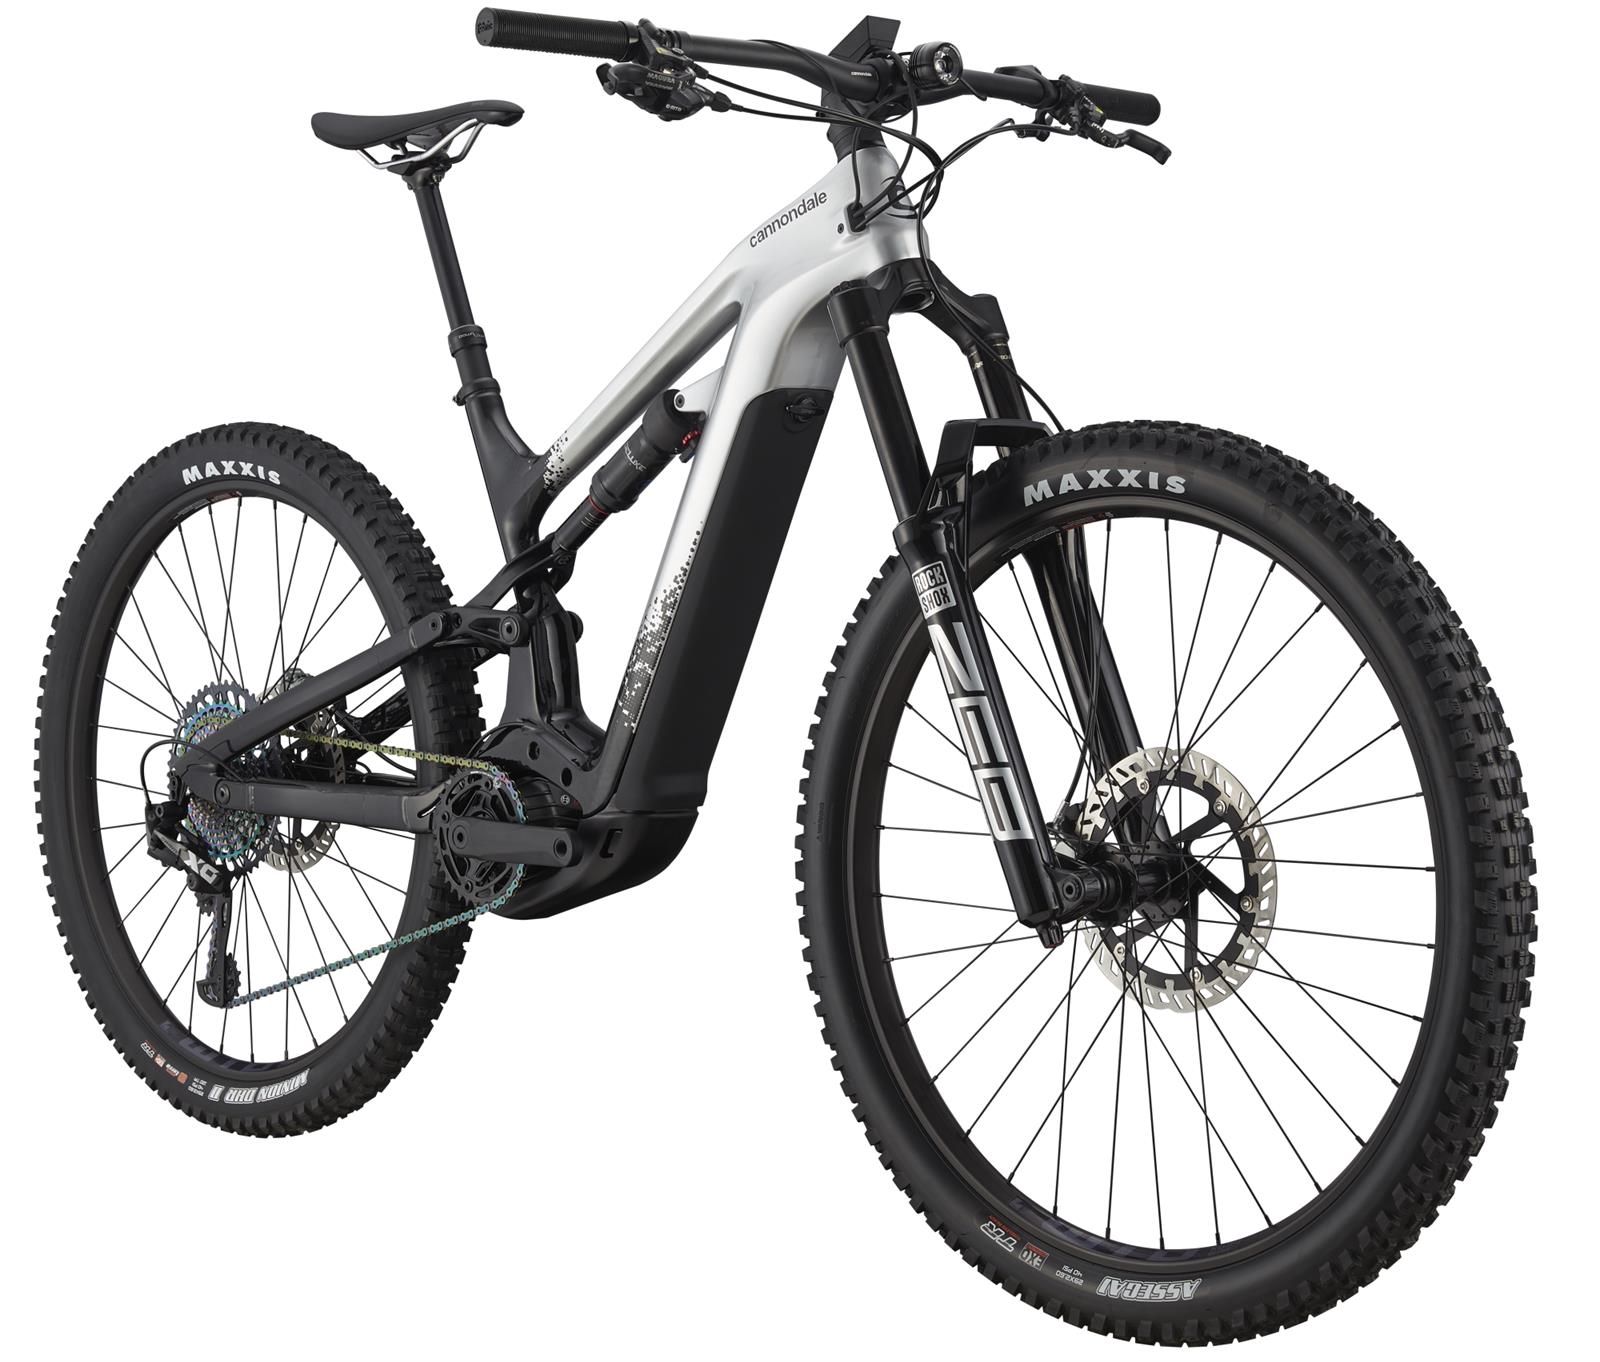 CANNONDALE Moterra Neo Crb 1 (2021)